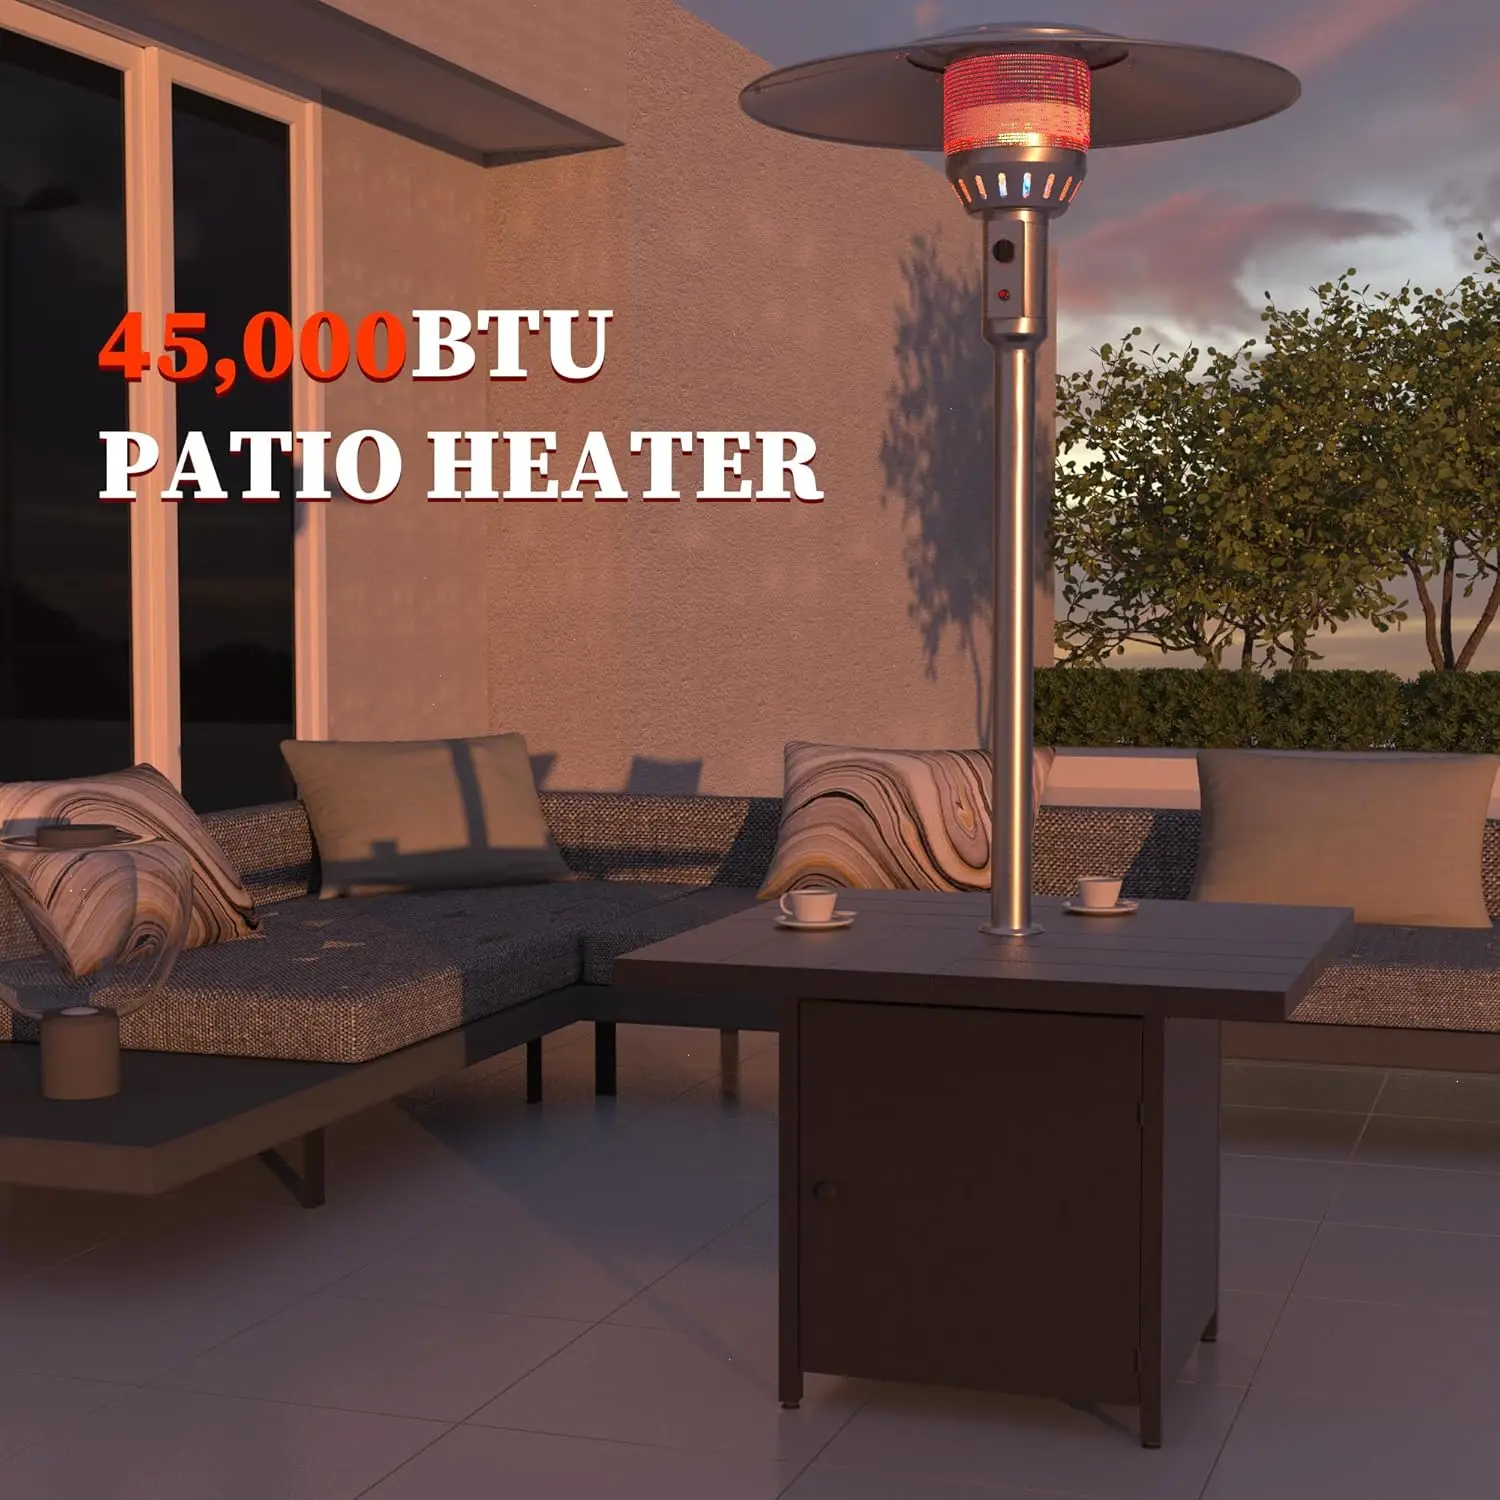 

45,000 BTU Patio Heater for Outdoor Use with Square Table, Stainless Steel Burner Auto-Ignition, Outdoor Propane Heater